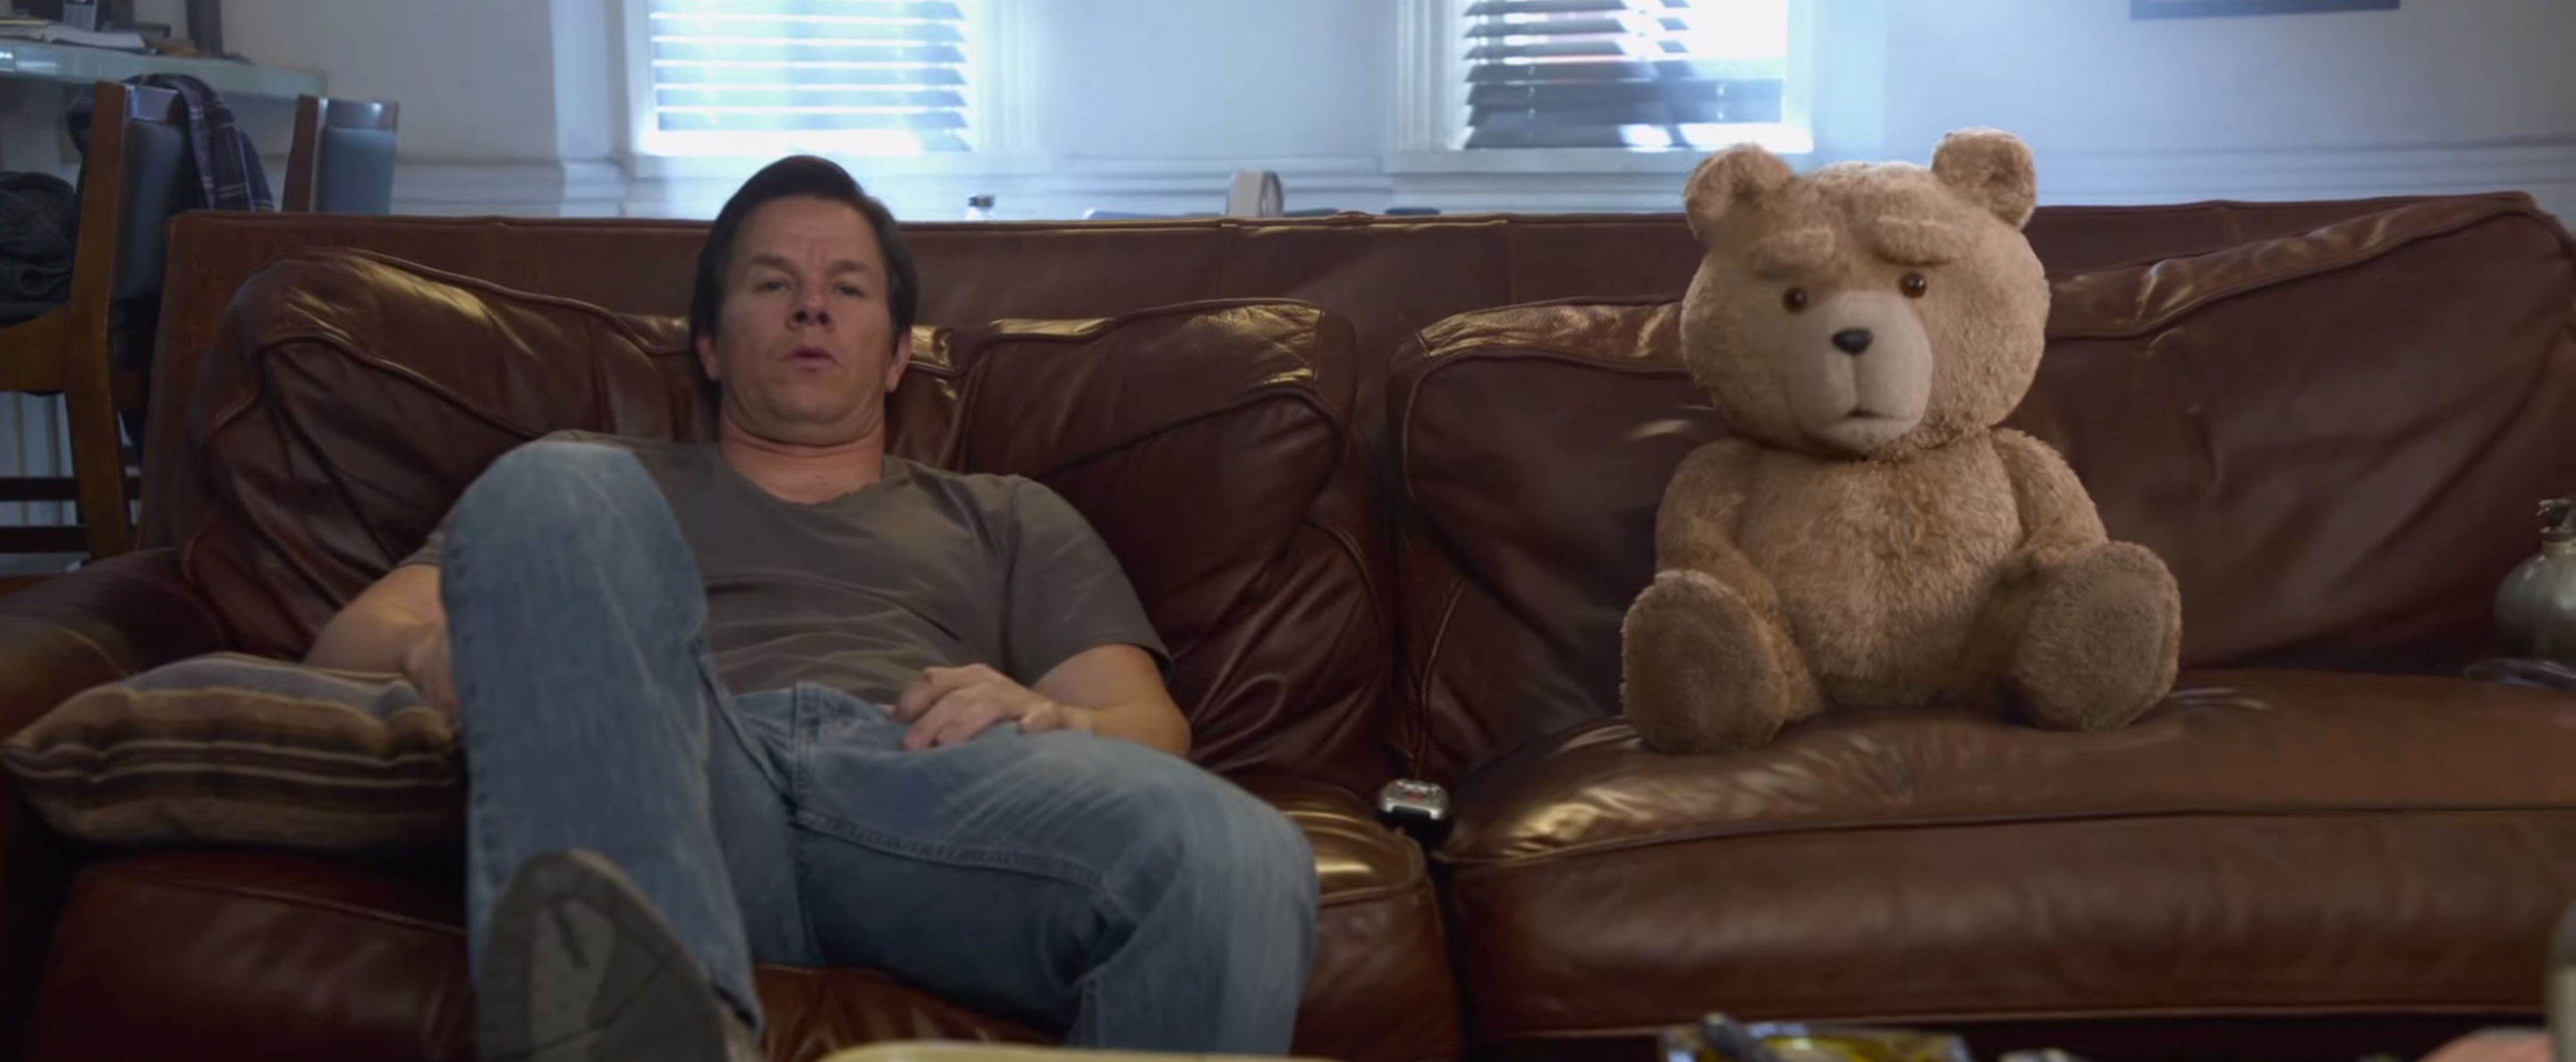 Free ted 2 online